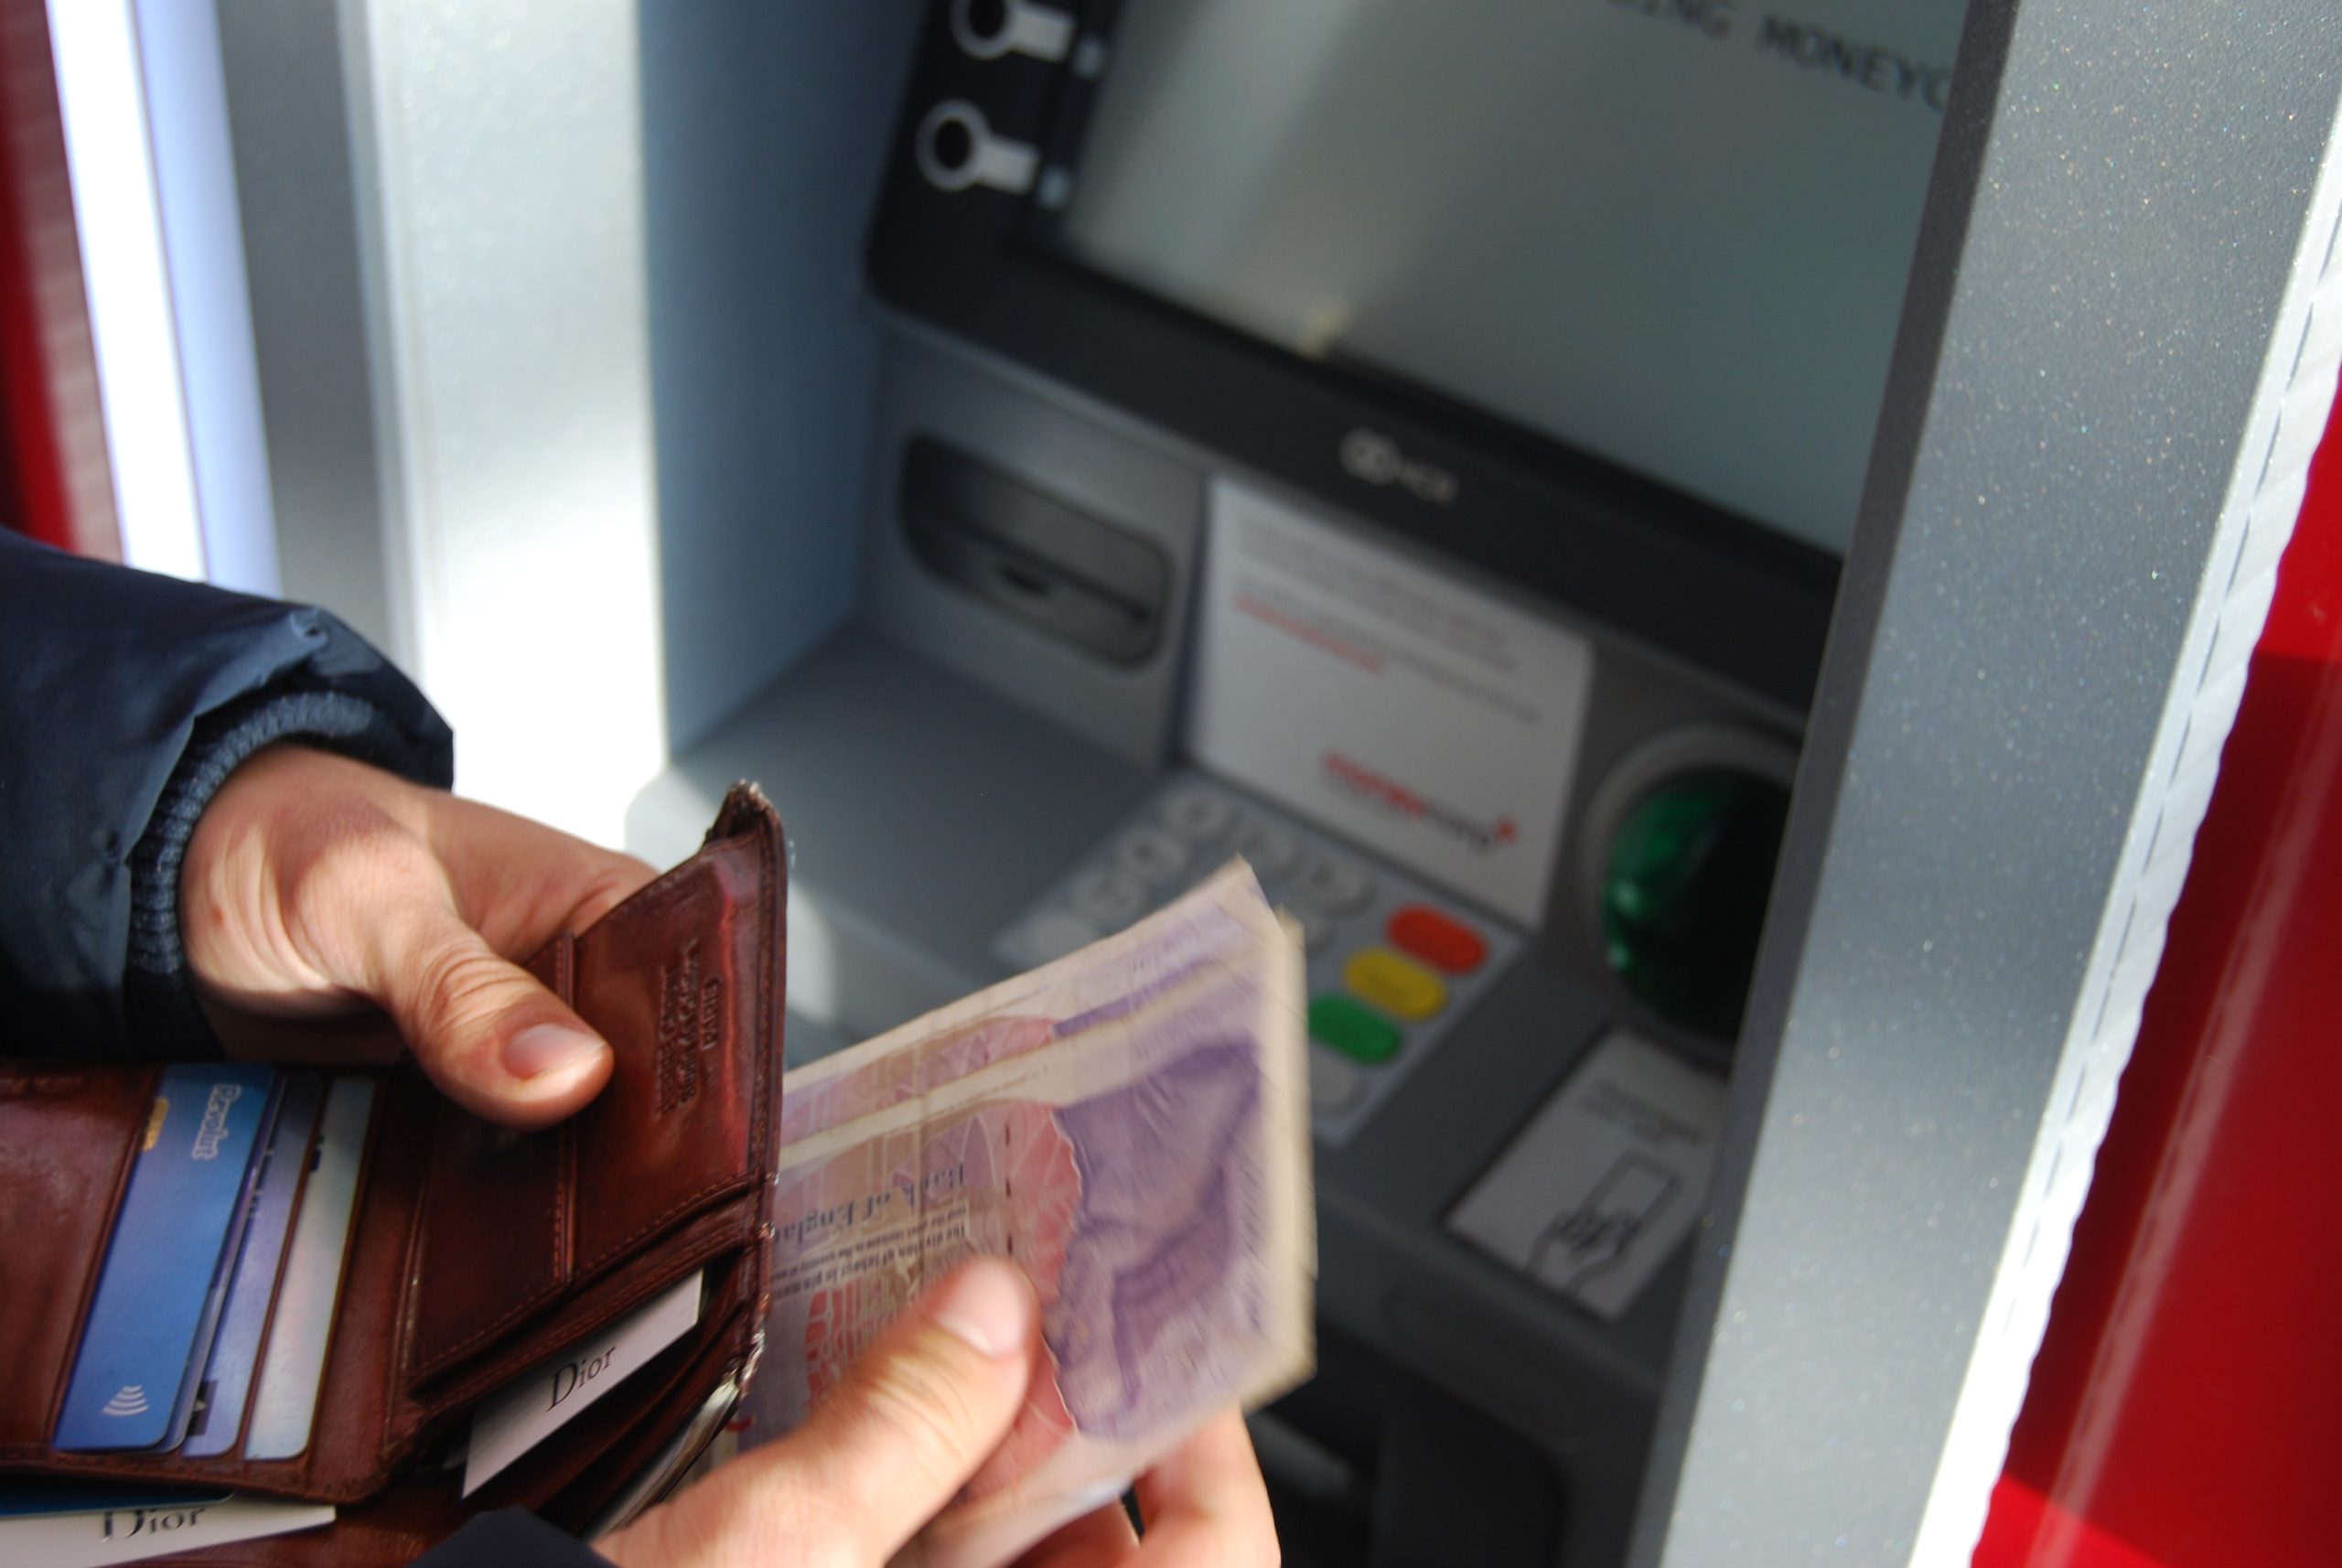 NEWS | Police warn people to be mindful when using cashpoints after two cashpoint thefts in Worcestershire in recent days